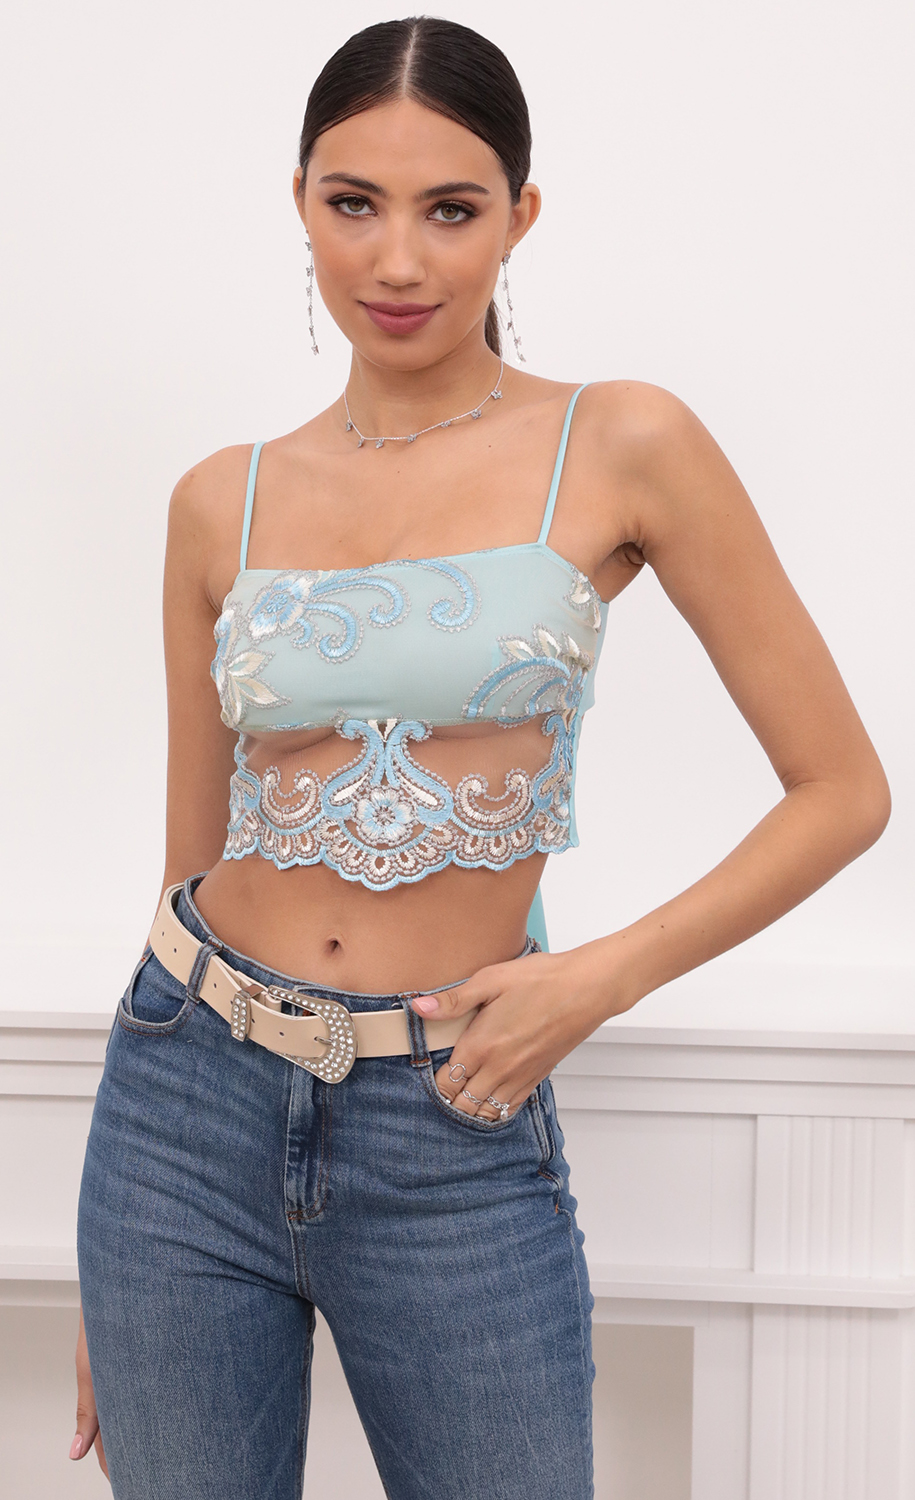 Roma Top in Aqua and Off White Lace